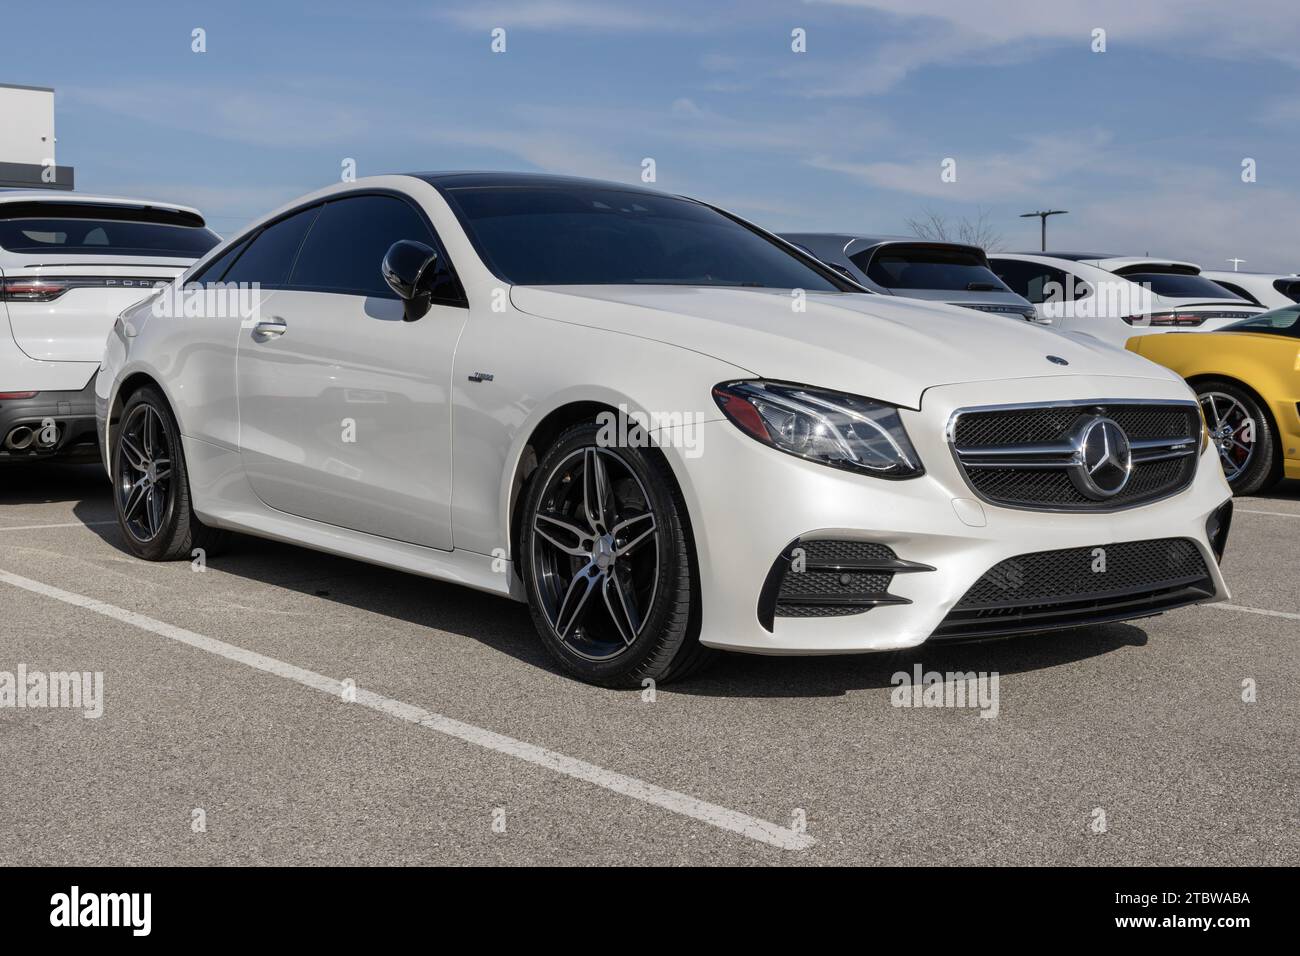 Indianapolis - November 30, 2023: Mercedes-Benz E-Class E53 AMG display at a dealership. Mercedes offers the E53 in coupe, sedan or cabriolet models. Stock Photo